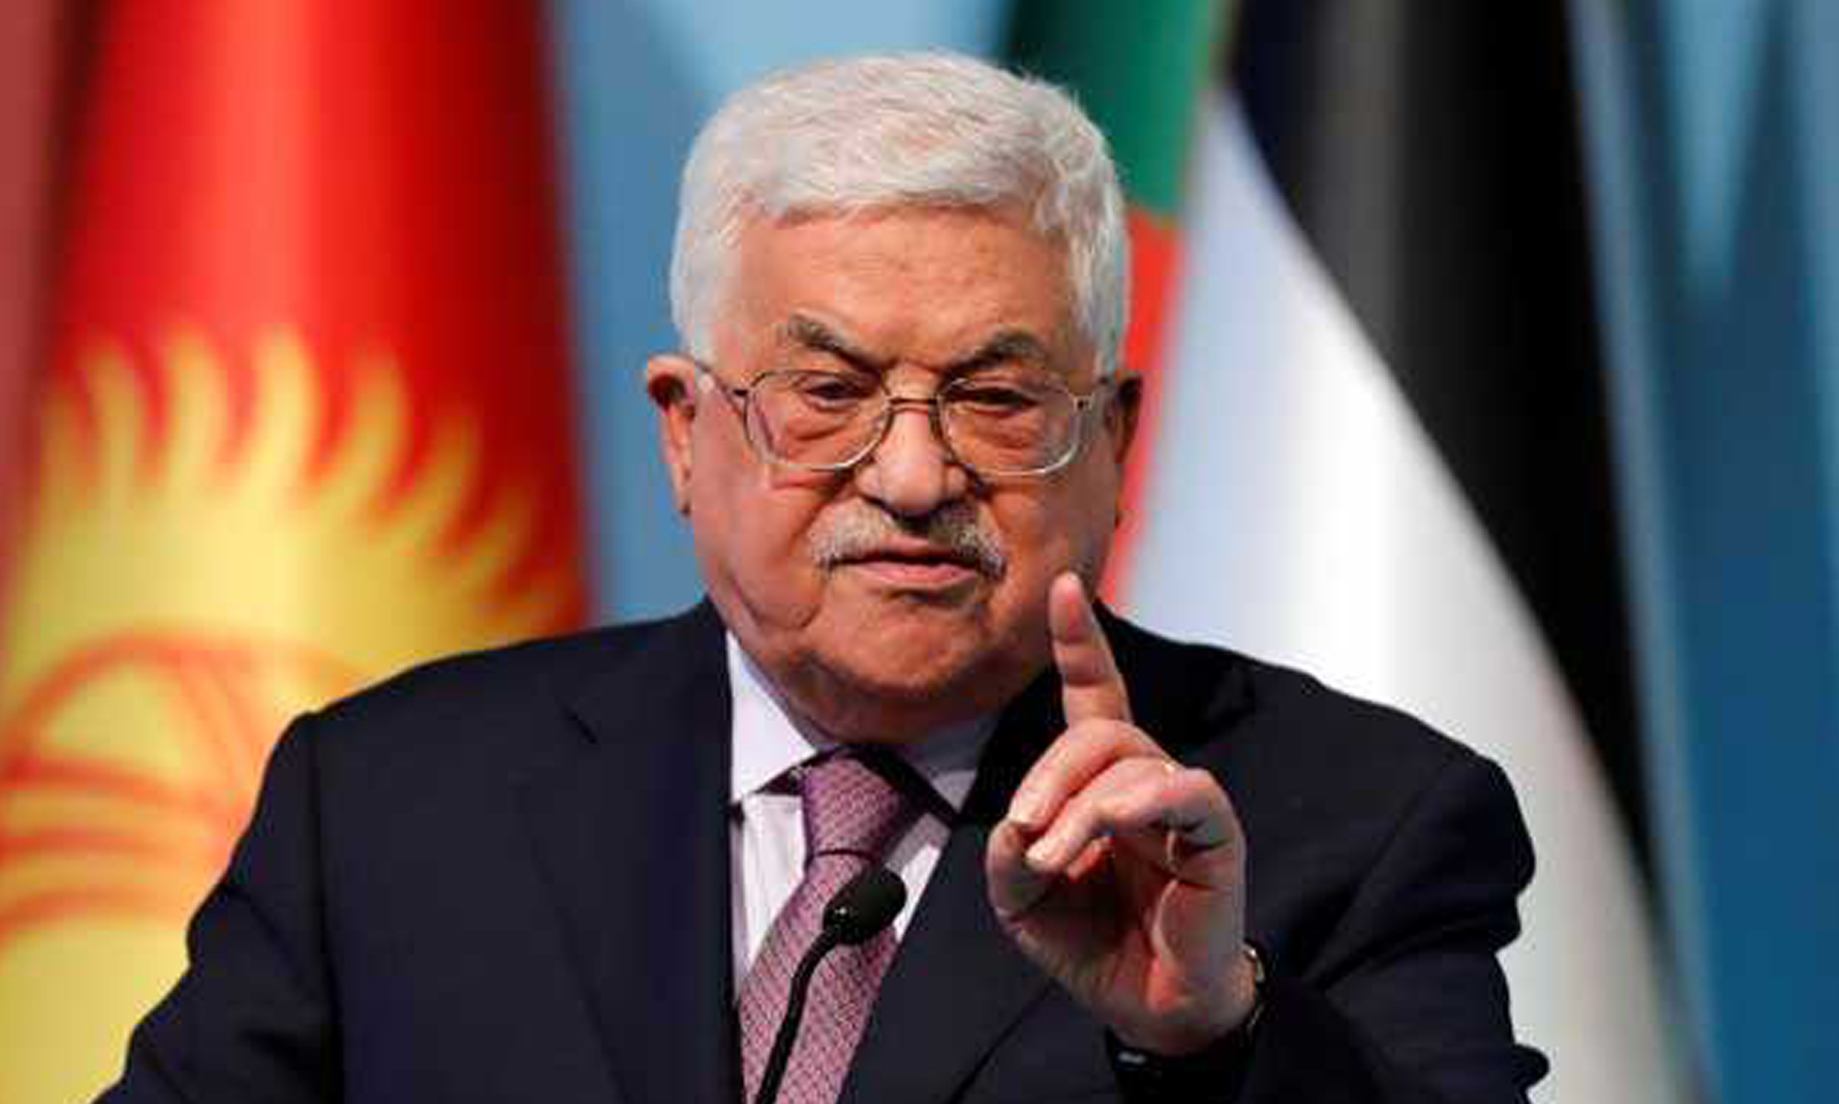 Palestinian President Abbas Condemns Assassination Attempt Of Fatah Official